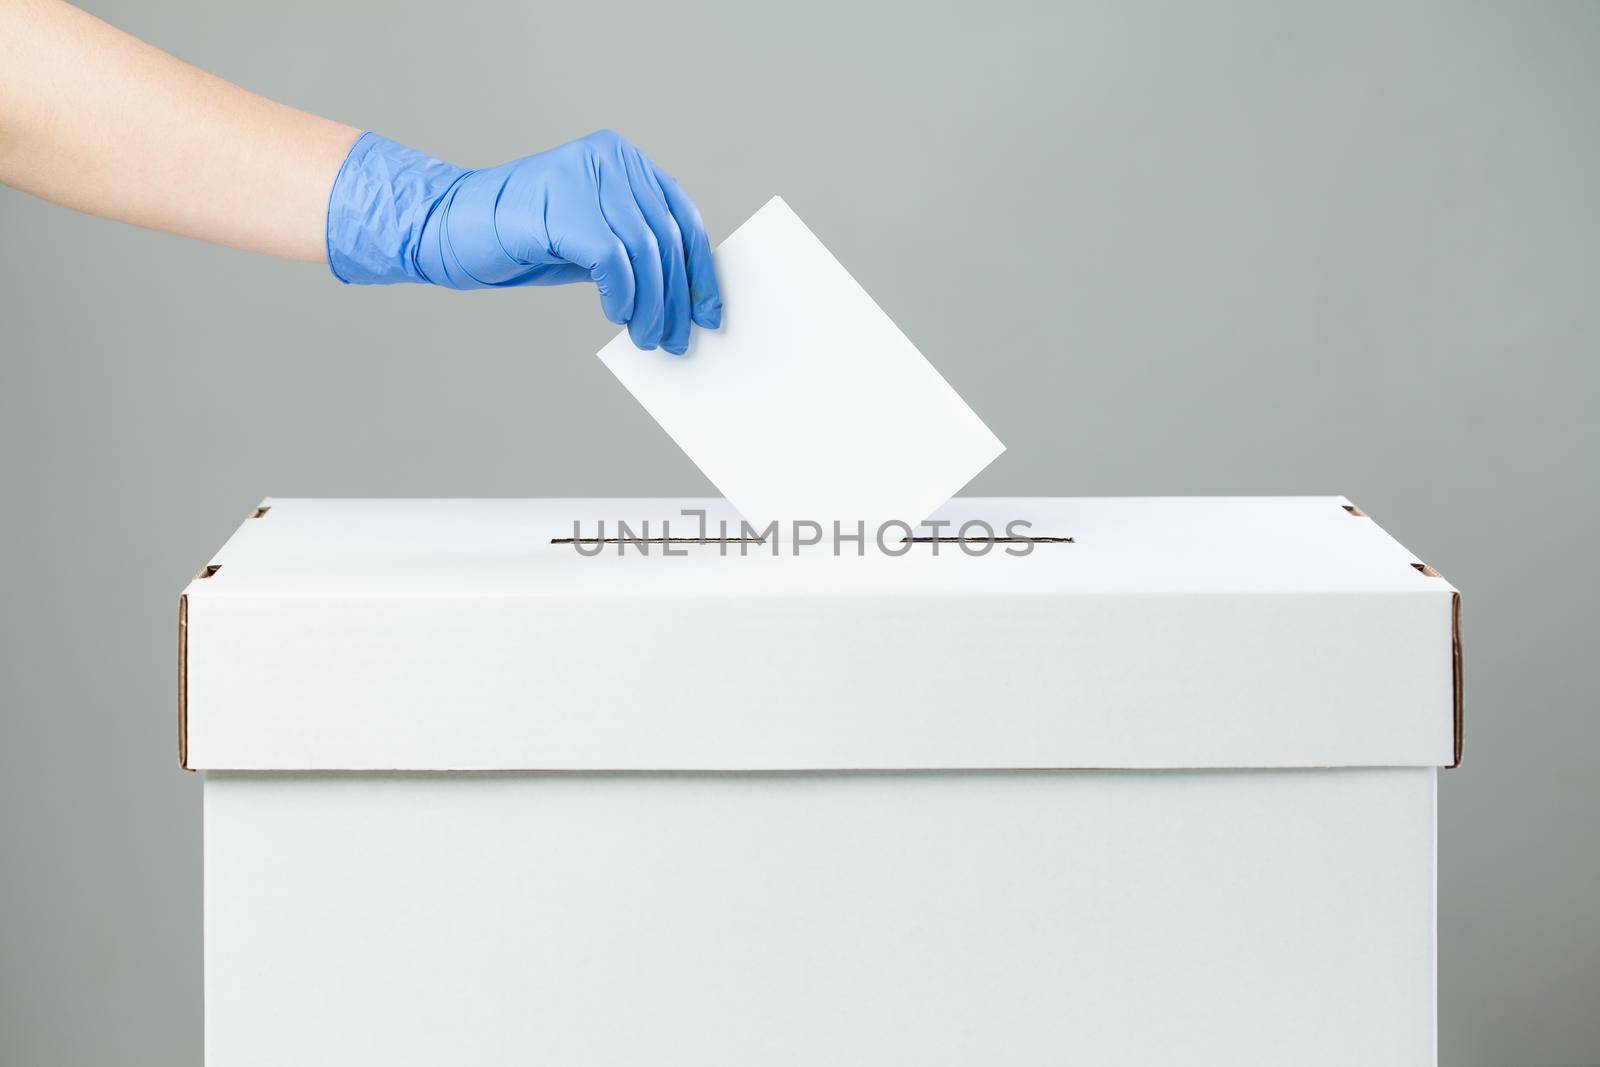 Caucasian female hand wearing blue protective latex rubber glove placing ballot paper in vote box by Plyushkin